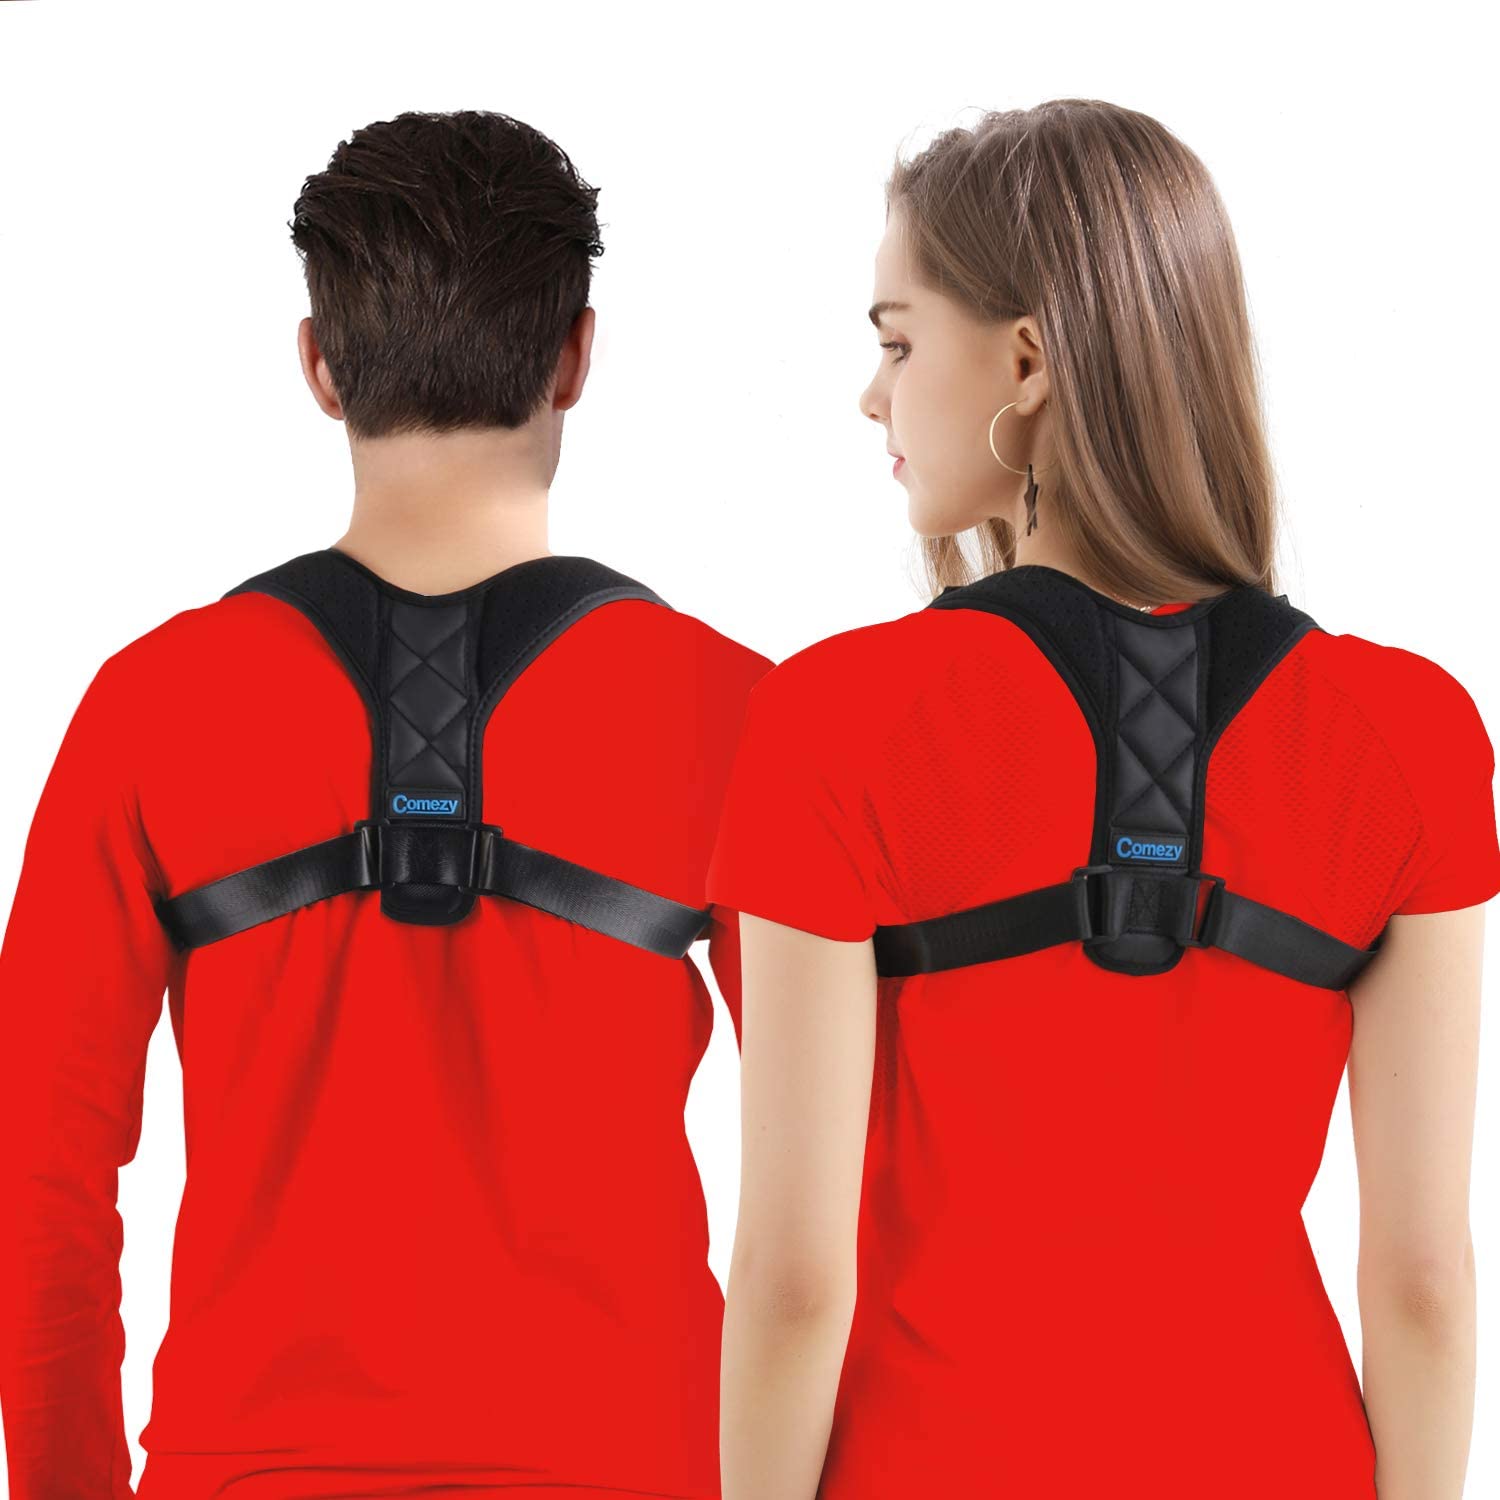 Comezy Unisex Posture Corrector For Back Pain Relief